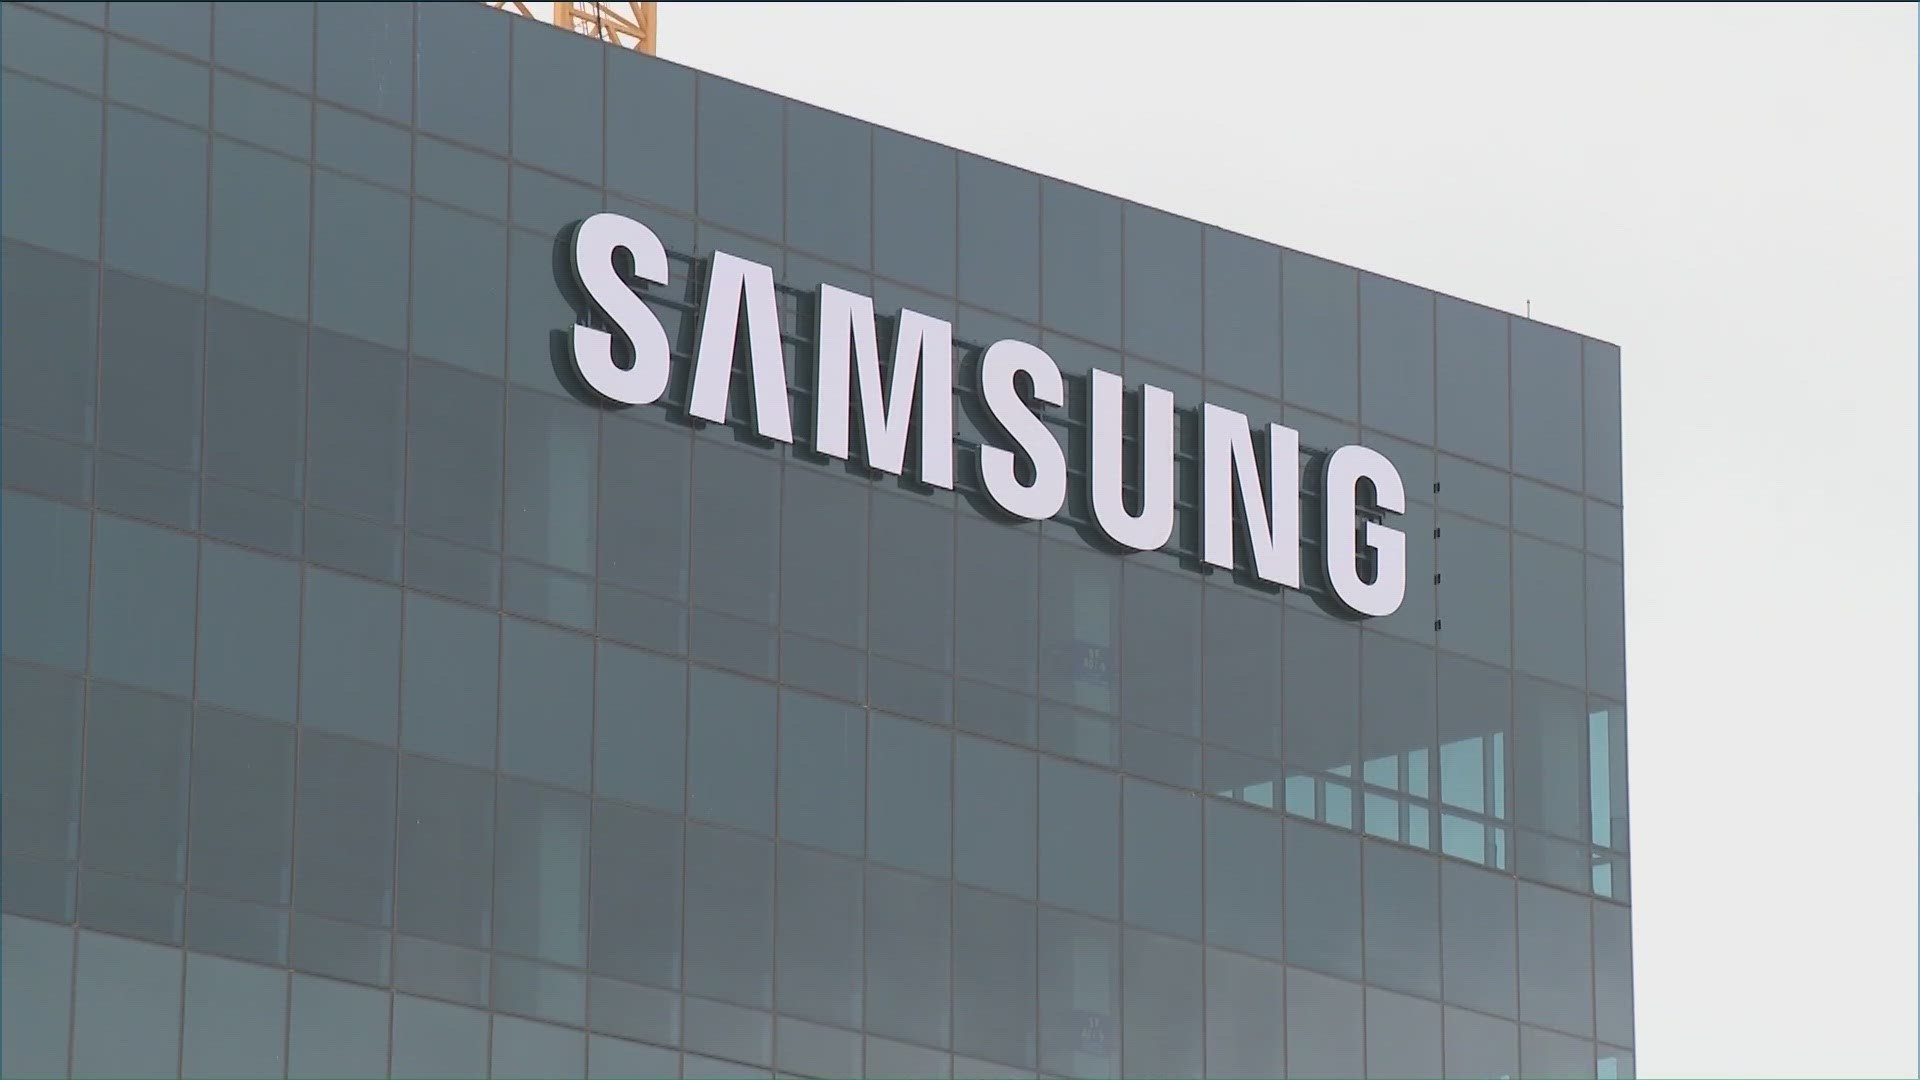 The federal government is giving Samsung more than $6 billion to expand computer chip manufacturing in Central Texas.